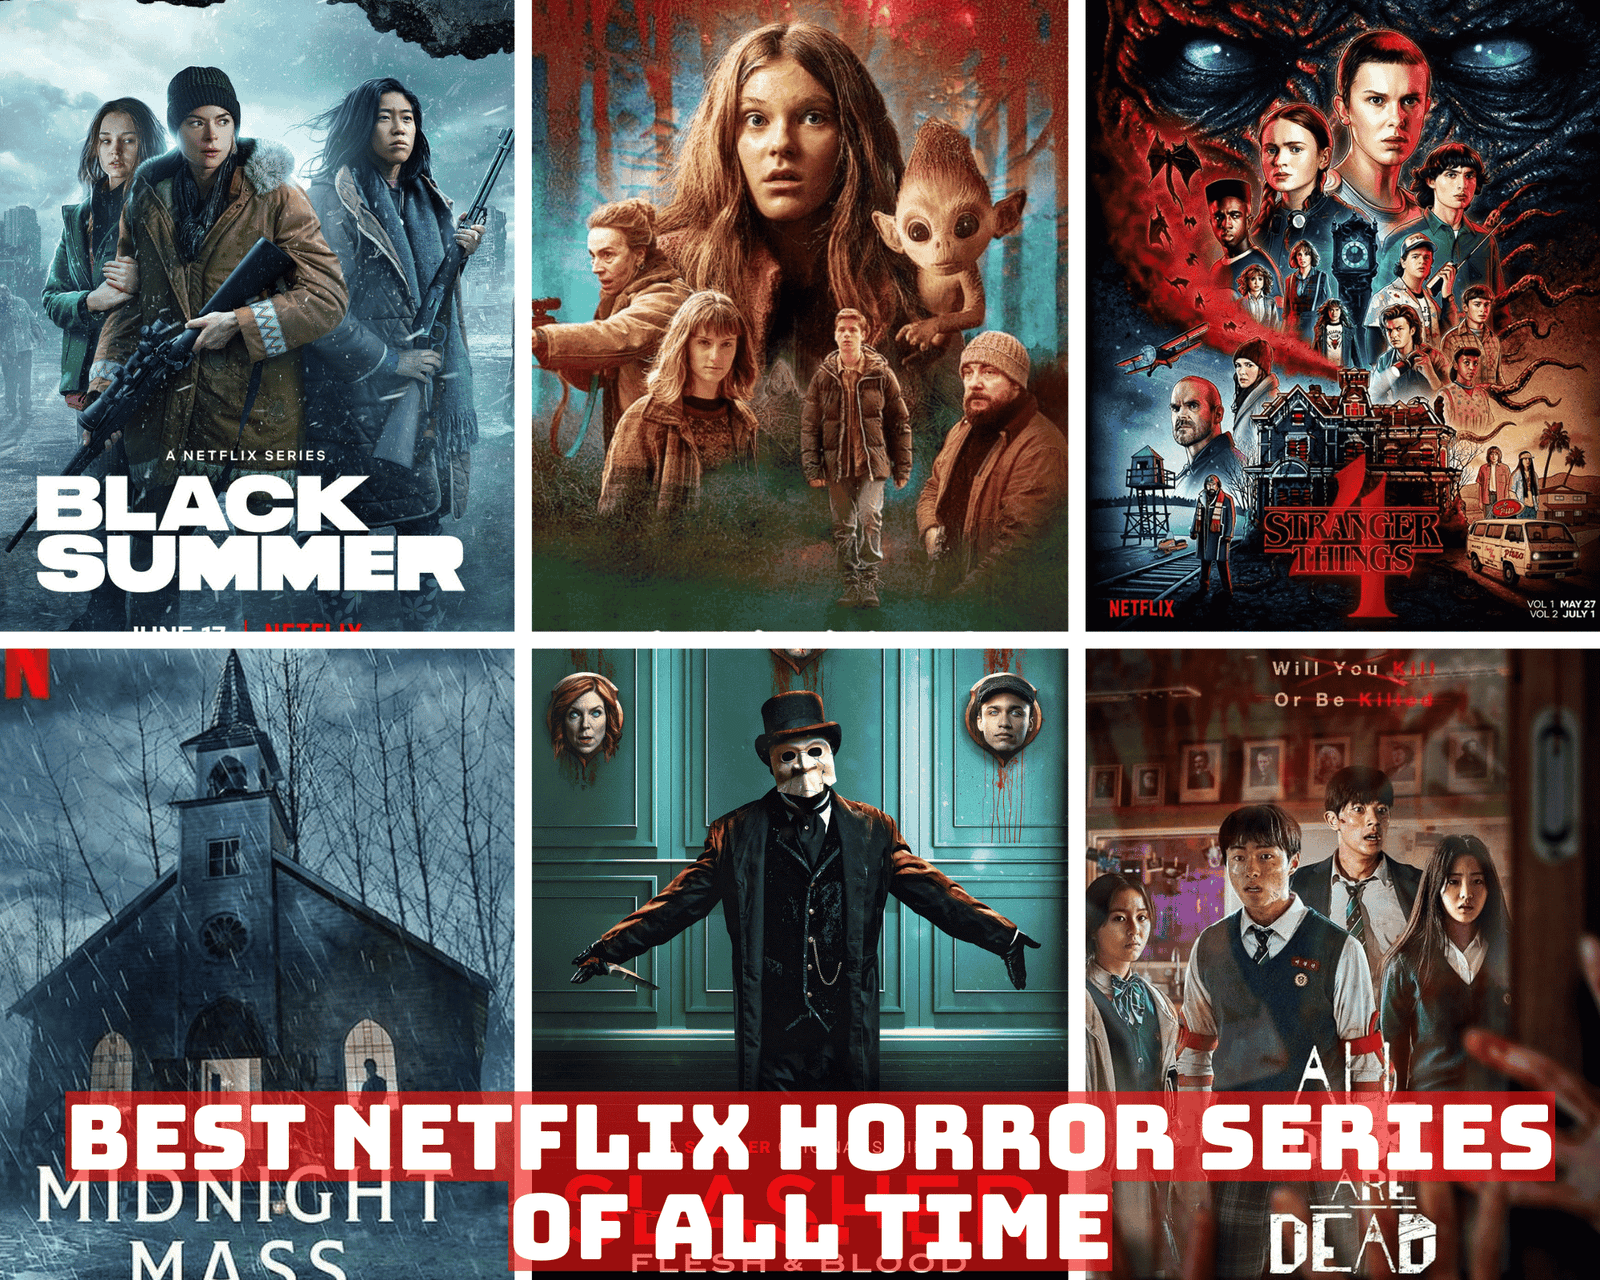 Best Netflix Horror Series of All Time to Watch in 2022